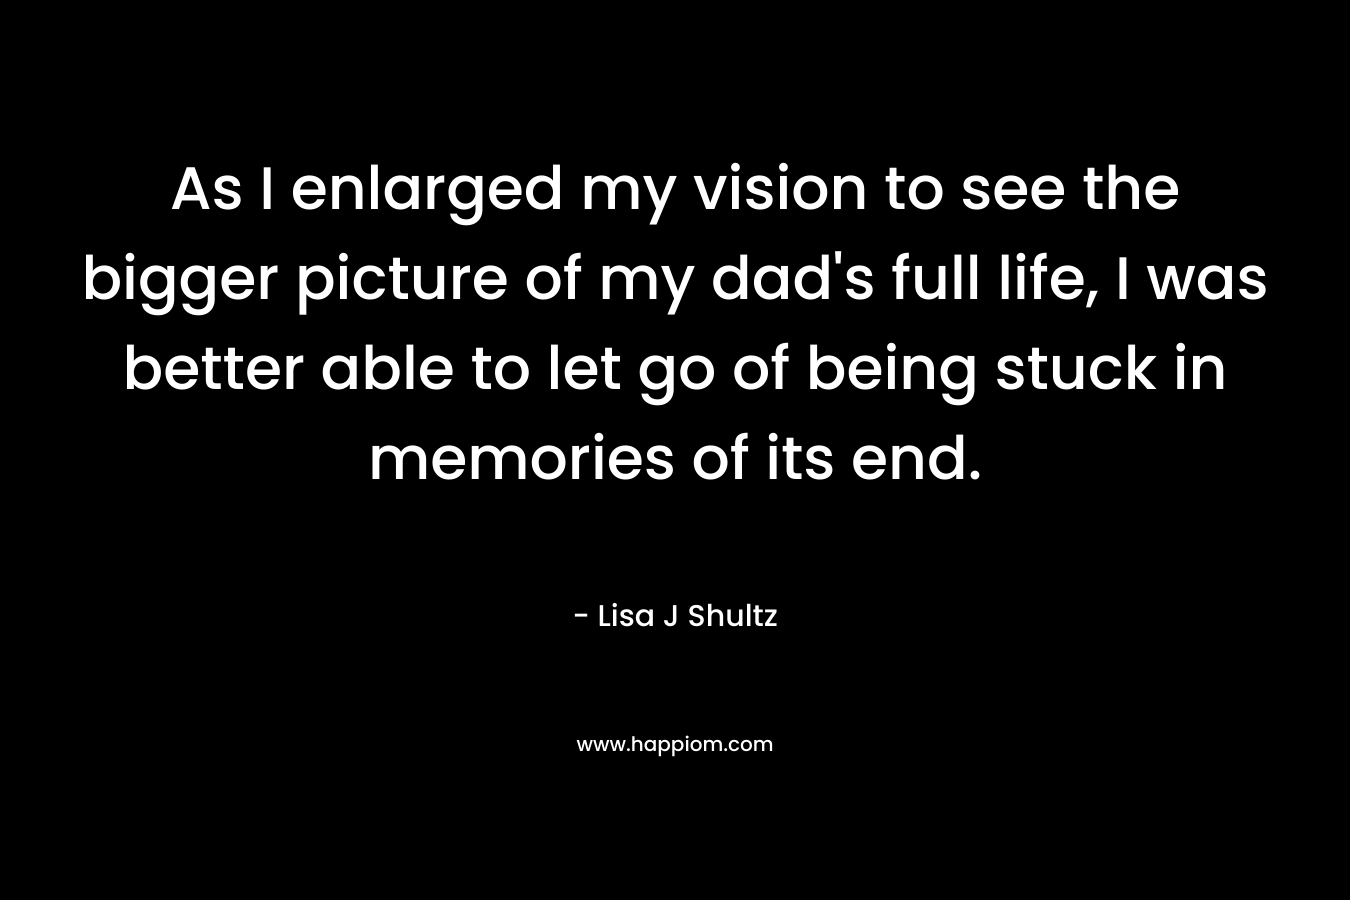 As I enlarged my vision to see the bigger picture of my dad’s full life, I was better able to let go of being stuck in memories of its end. – Lisa J Shultz